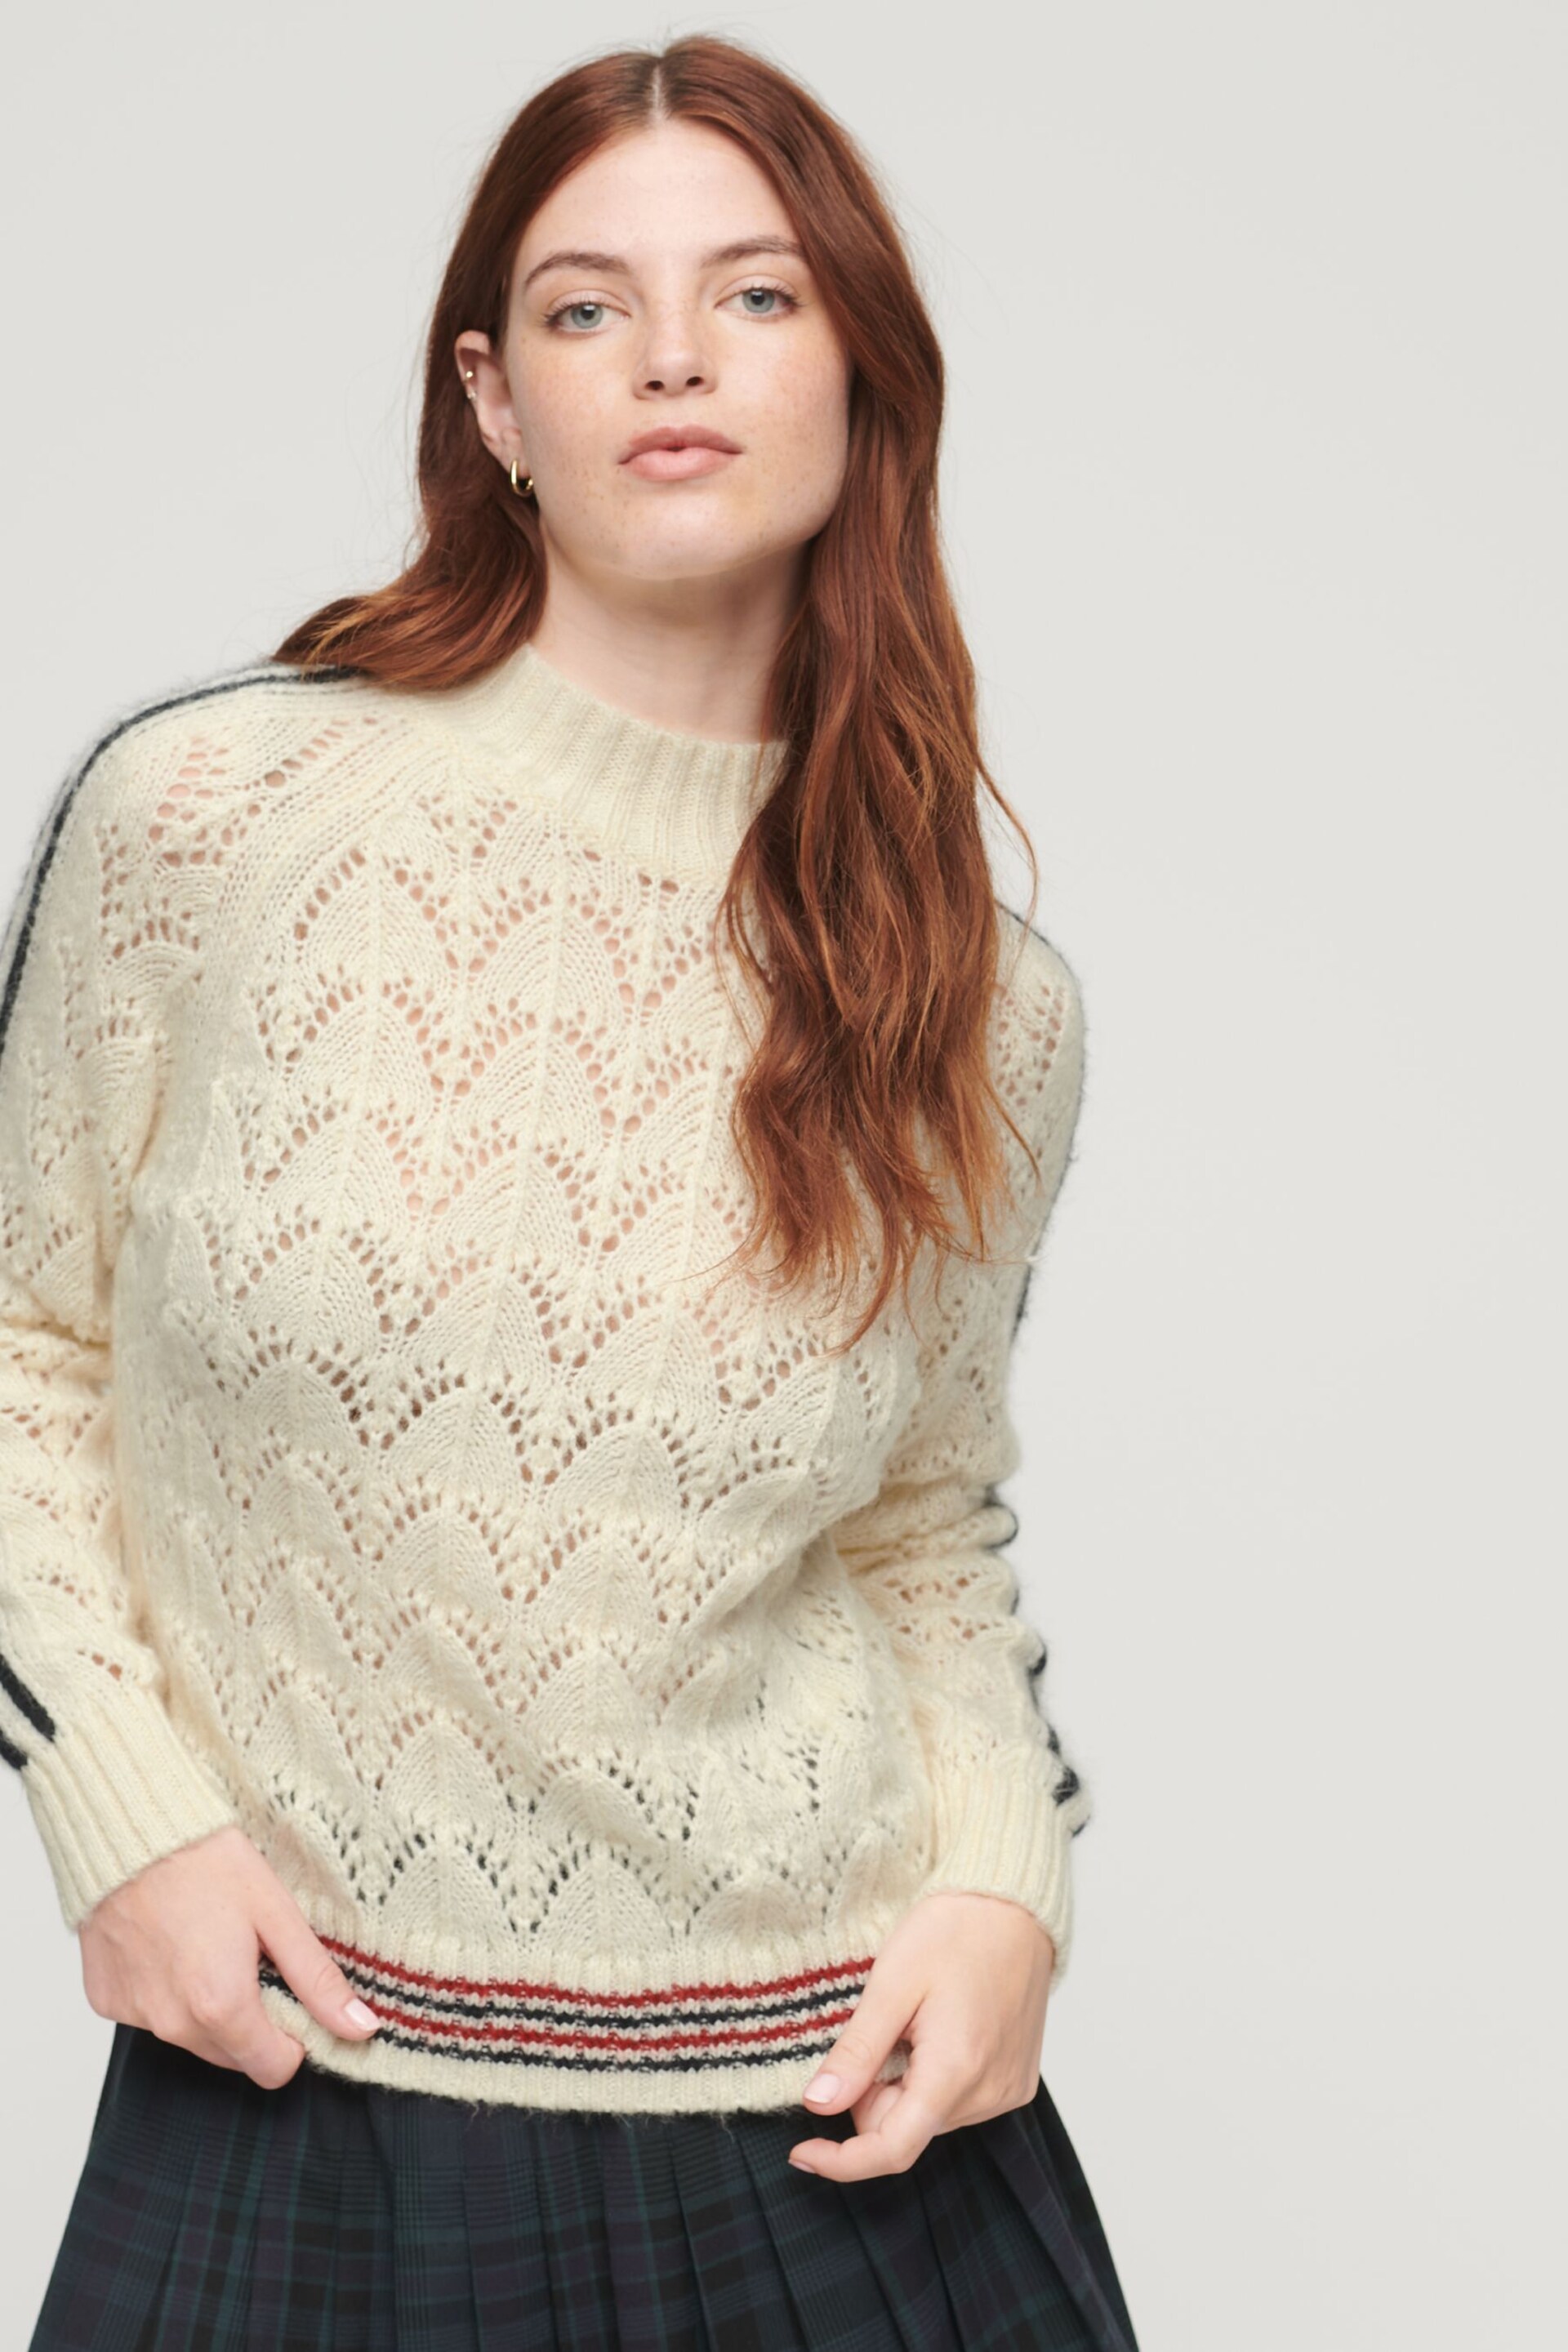 Superdry Cream Pointelle Knit Jumper - Image 1 of 5